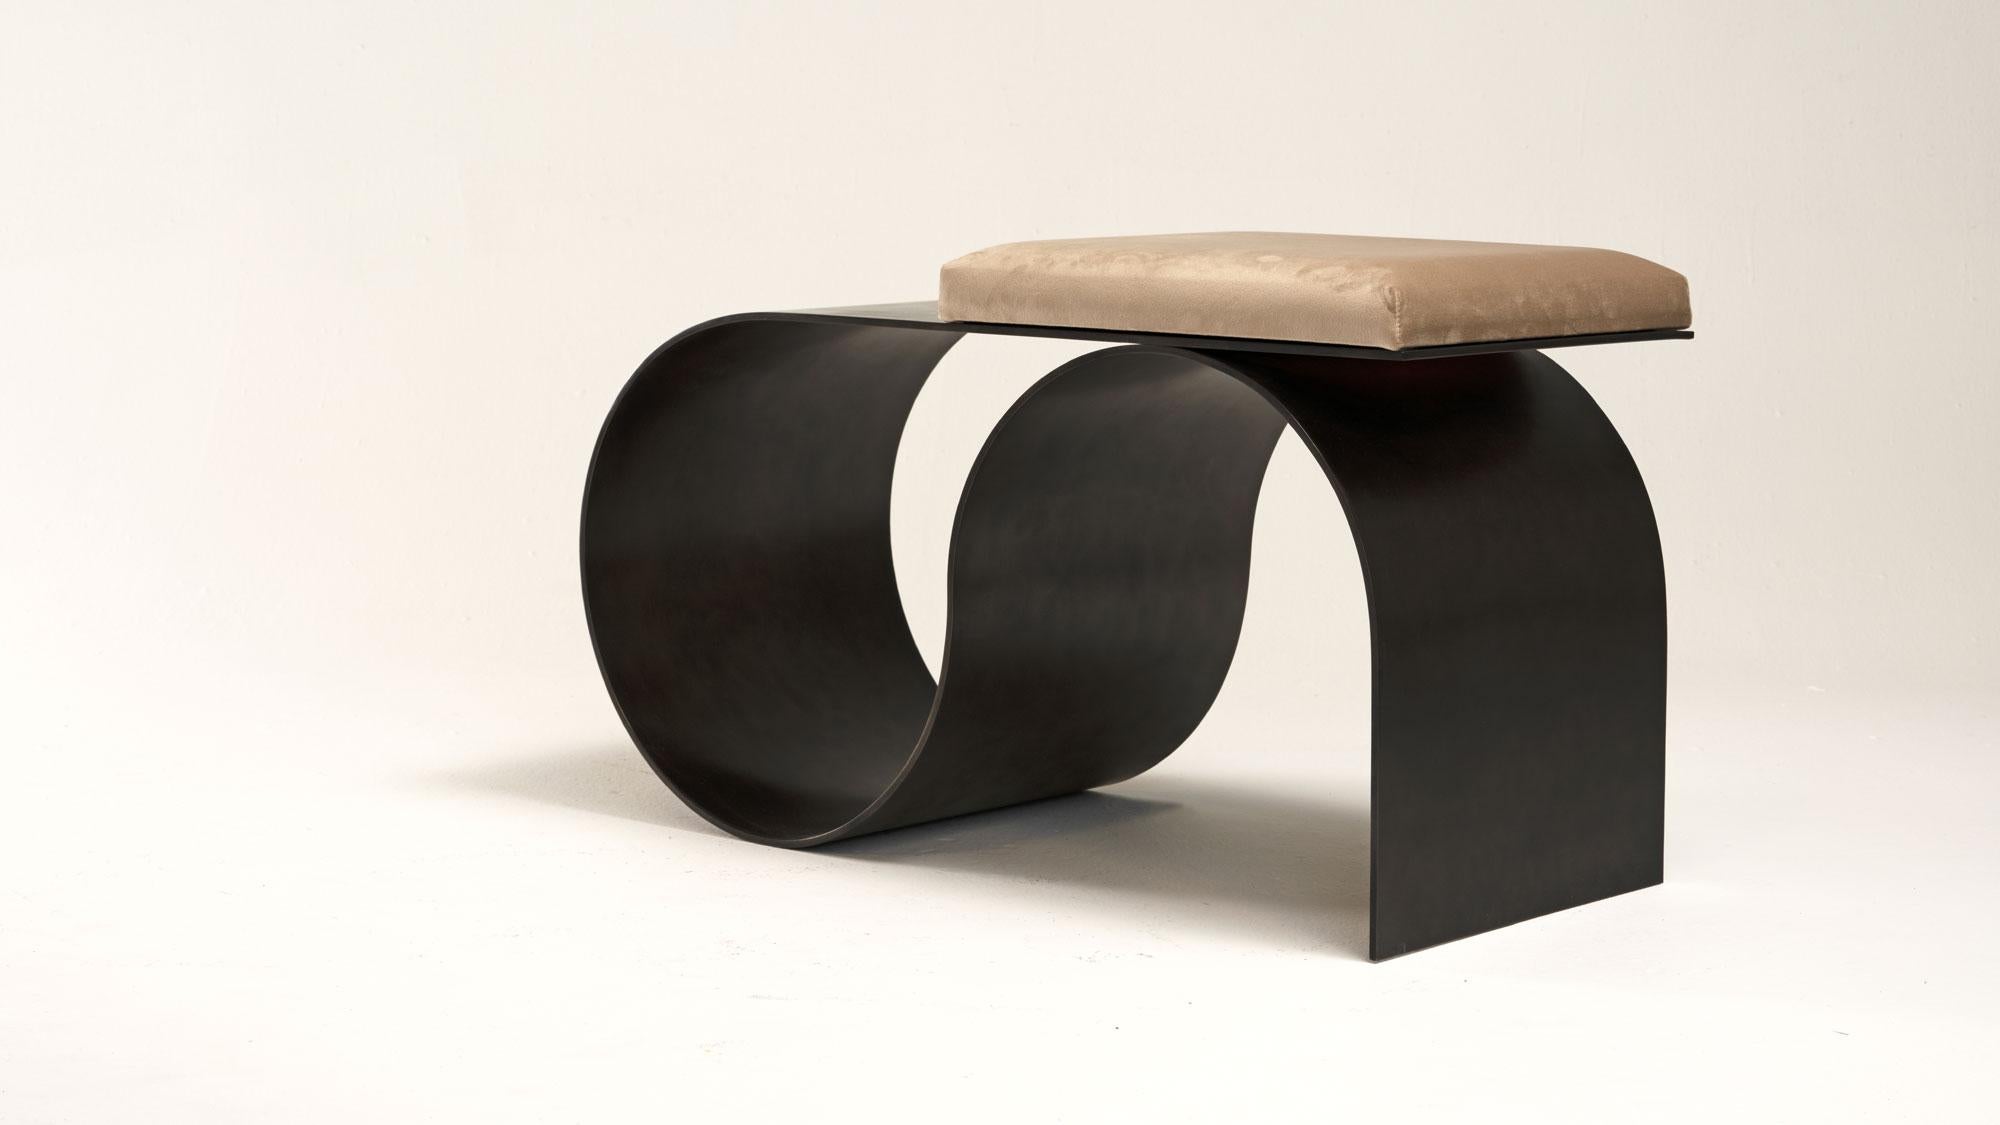 Sia bench by Jason Mizrahi
Dimensions: W 33”, D 14”, H 18”
Materials: Aluminium, bronze-plated with leather or velvet seat cover 

Finish option: Black powder coat finish
Custom colors available.


Jason Mizrahi is a designer of contemporary